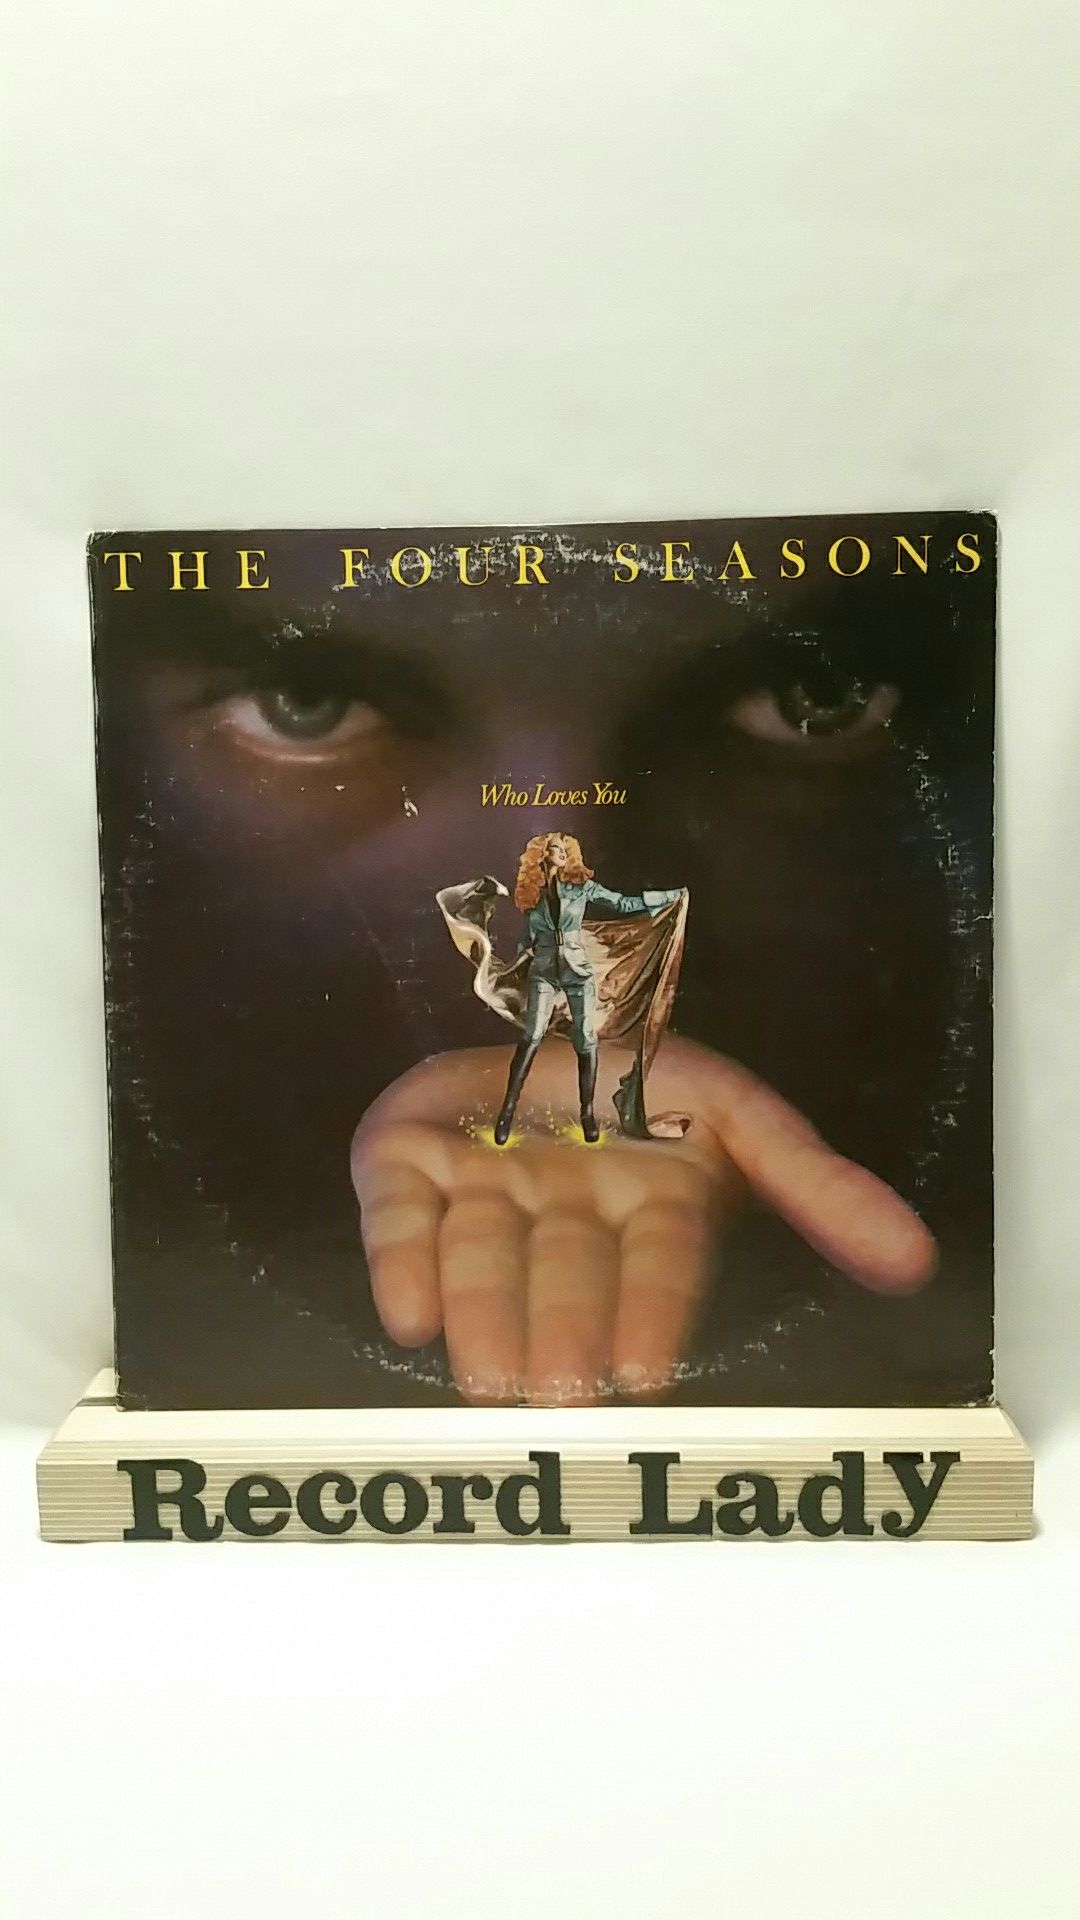 The Four Seasons "Who Loves You" vinyl record